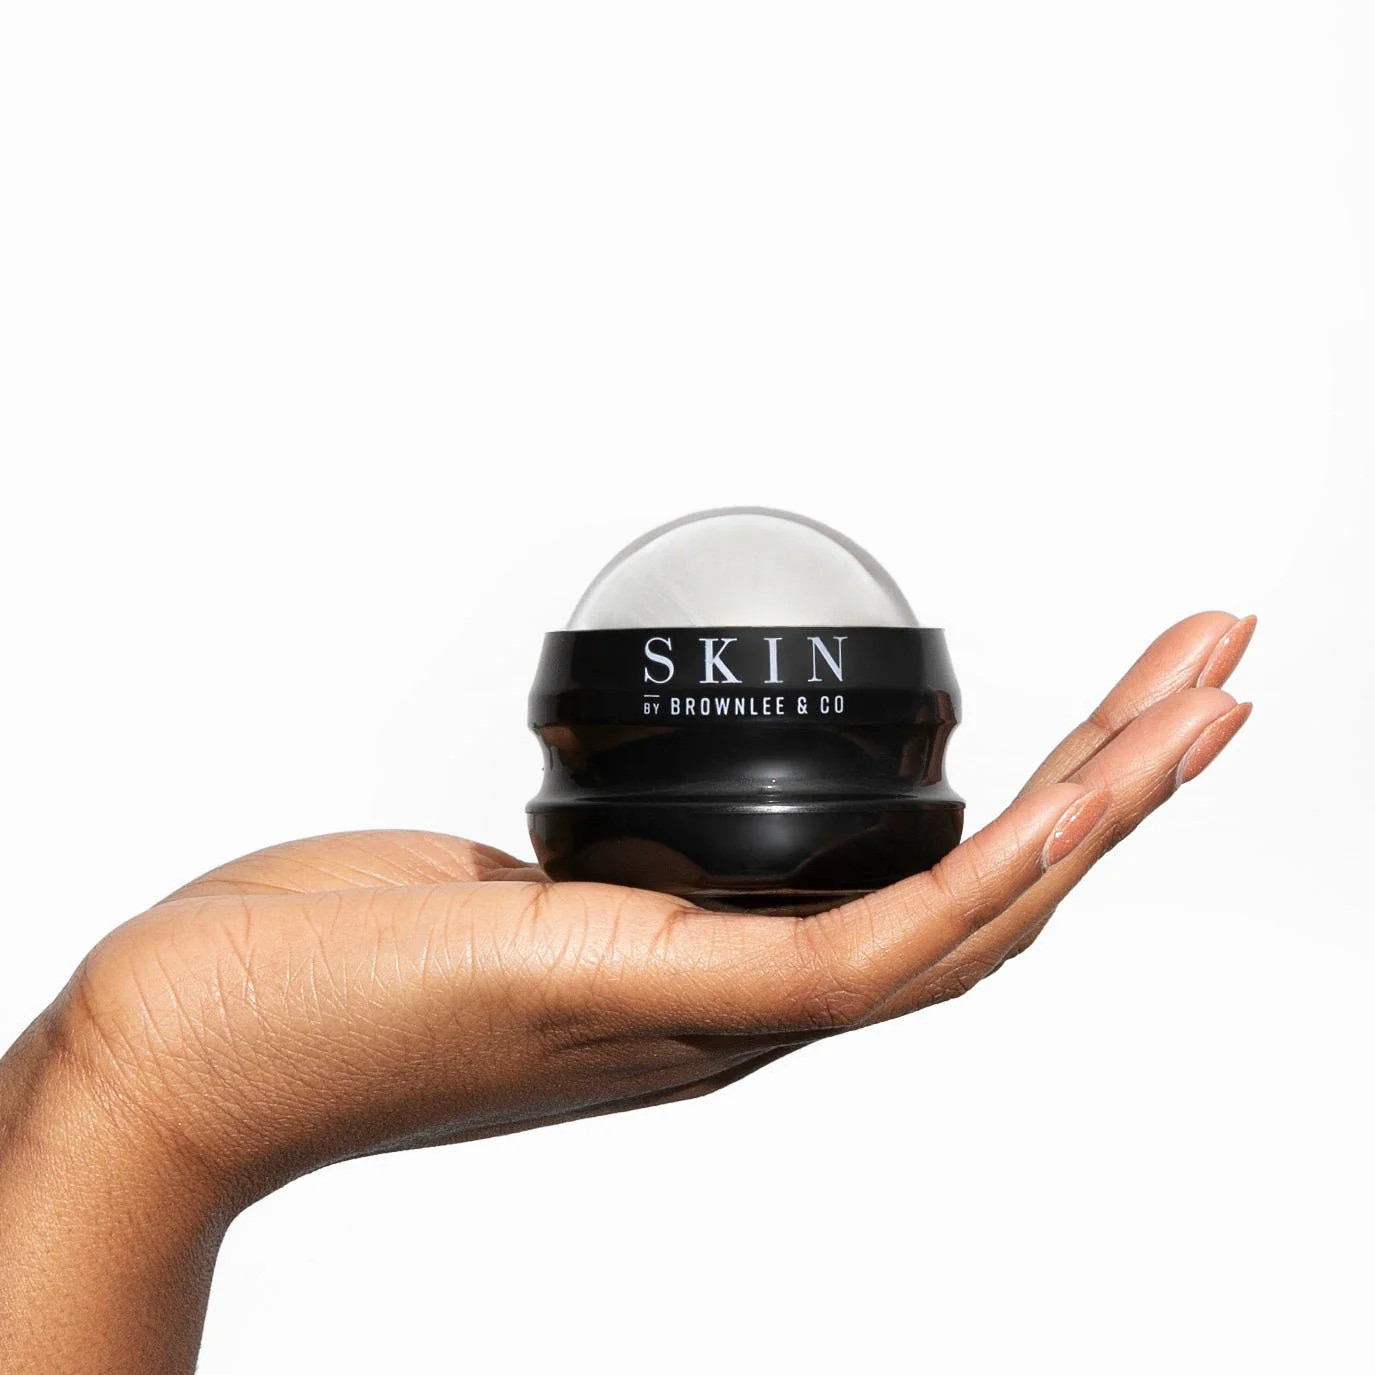 Skin by Brownlee & Co. Cryotherapy Ball | Skin by Brownlee & Co.